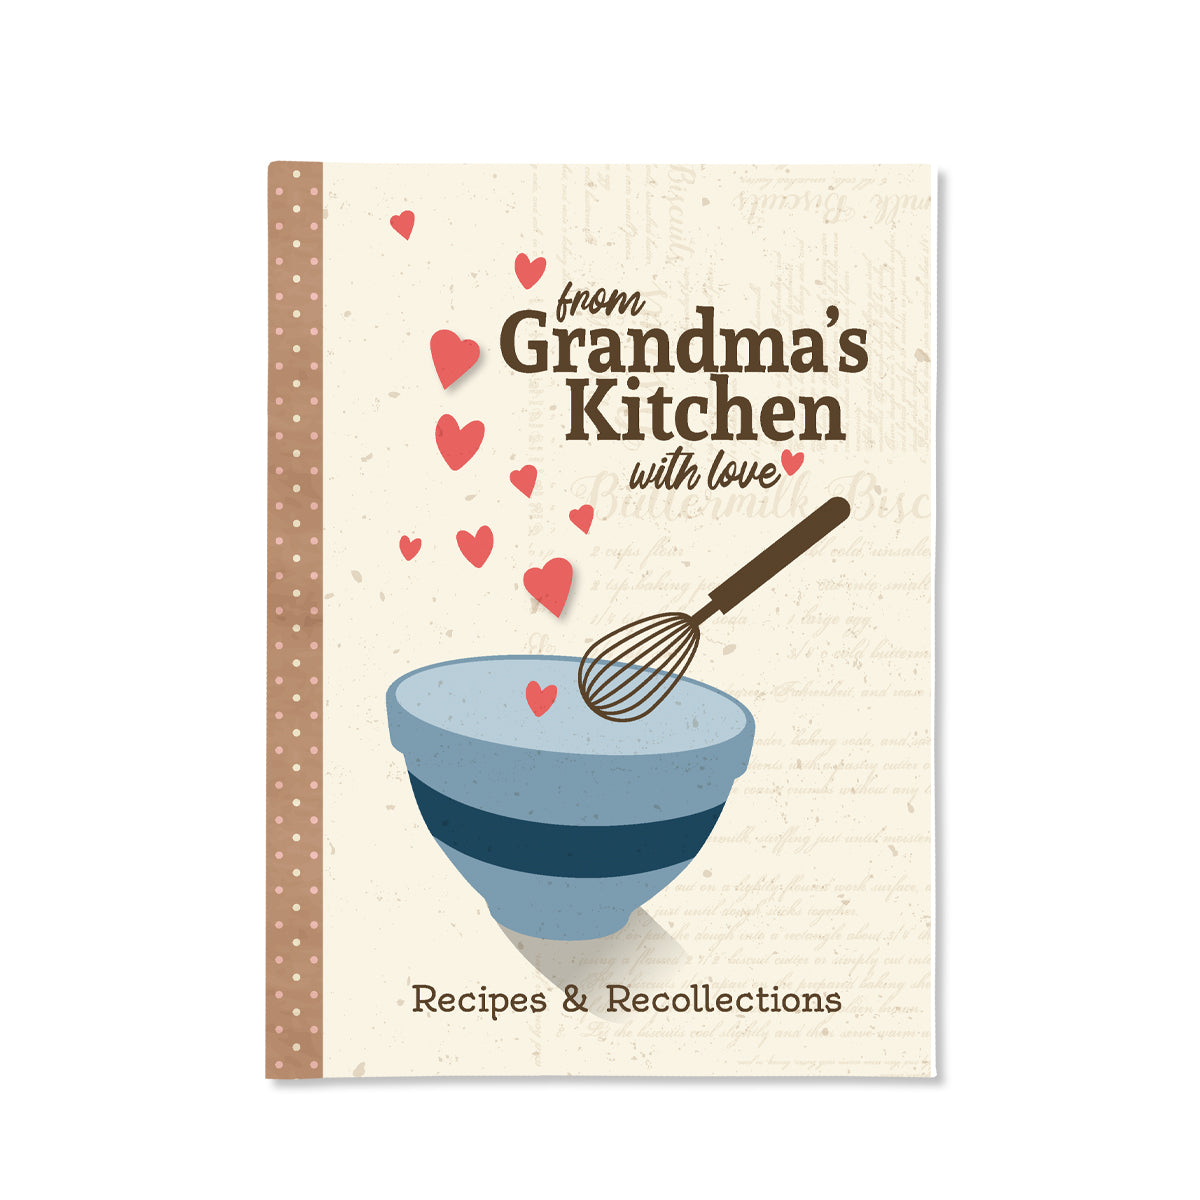 Cover of a book titled "From Grandma's Kitchen with love" Recipes and Recollections.